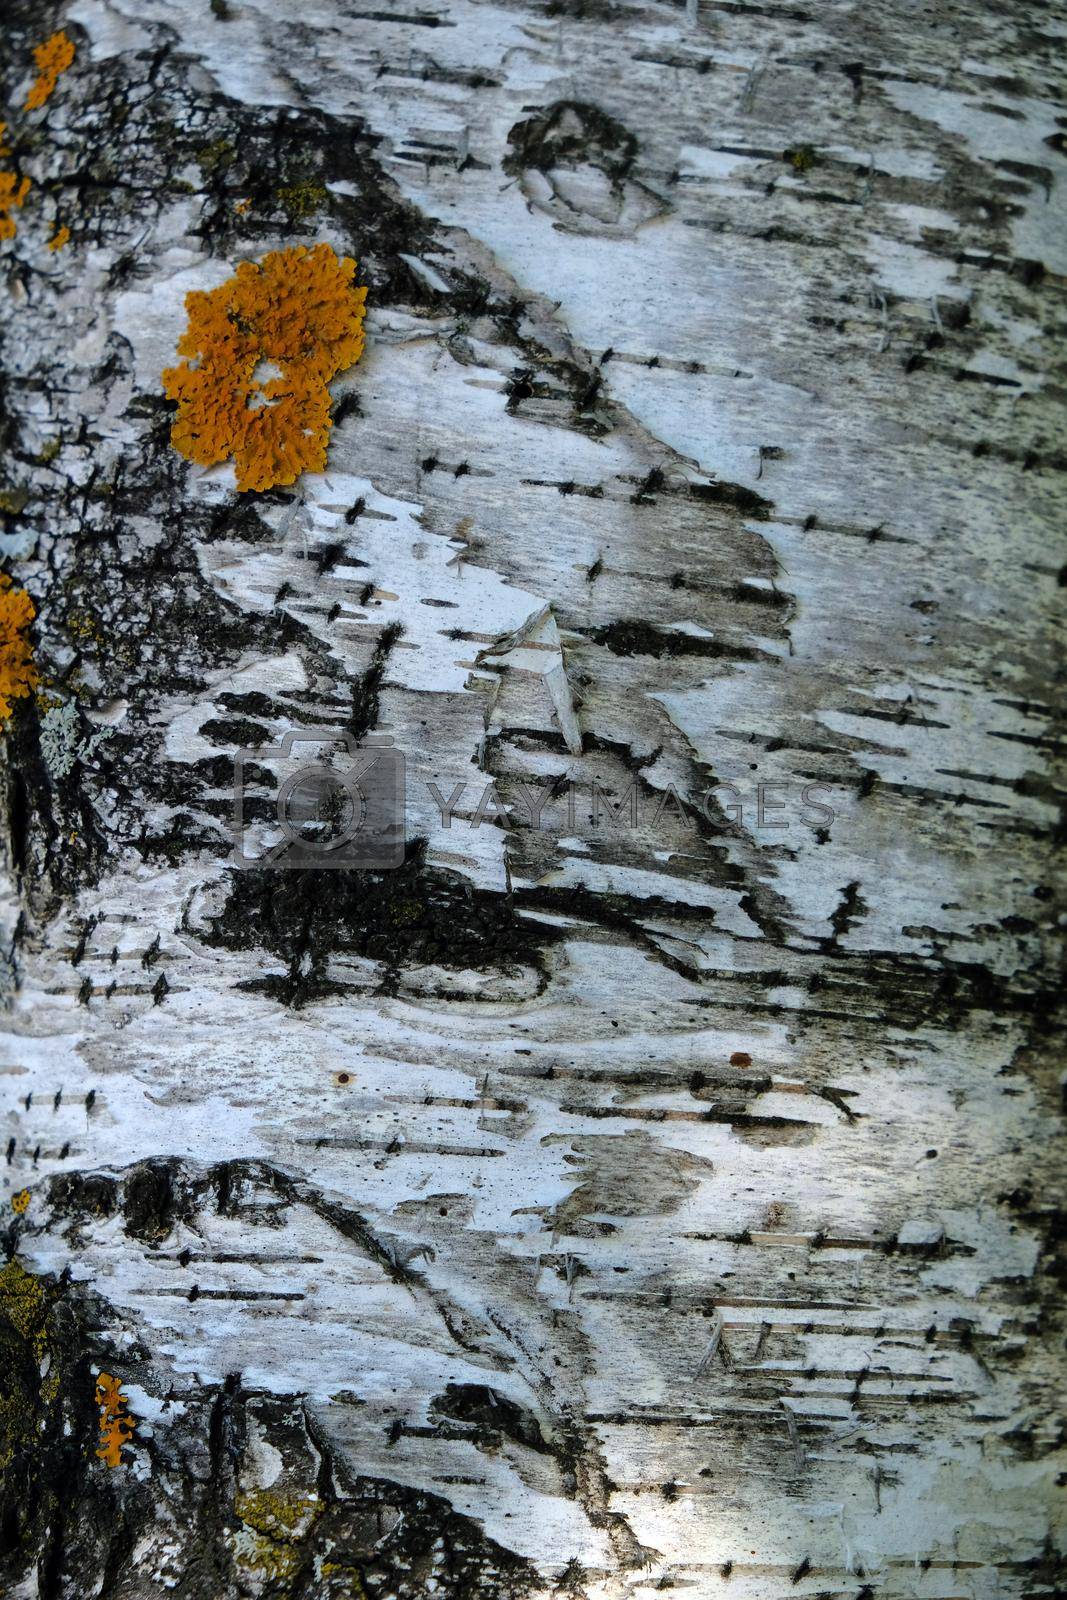 Royalty free image of Black-white striped and cracked natural texture of russian birch bark by IvanSNS